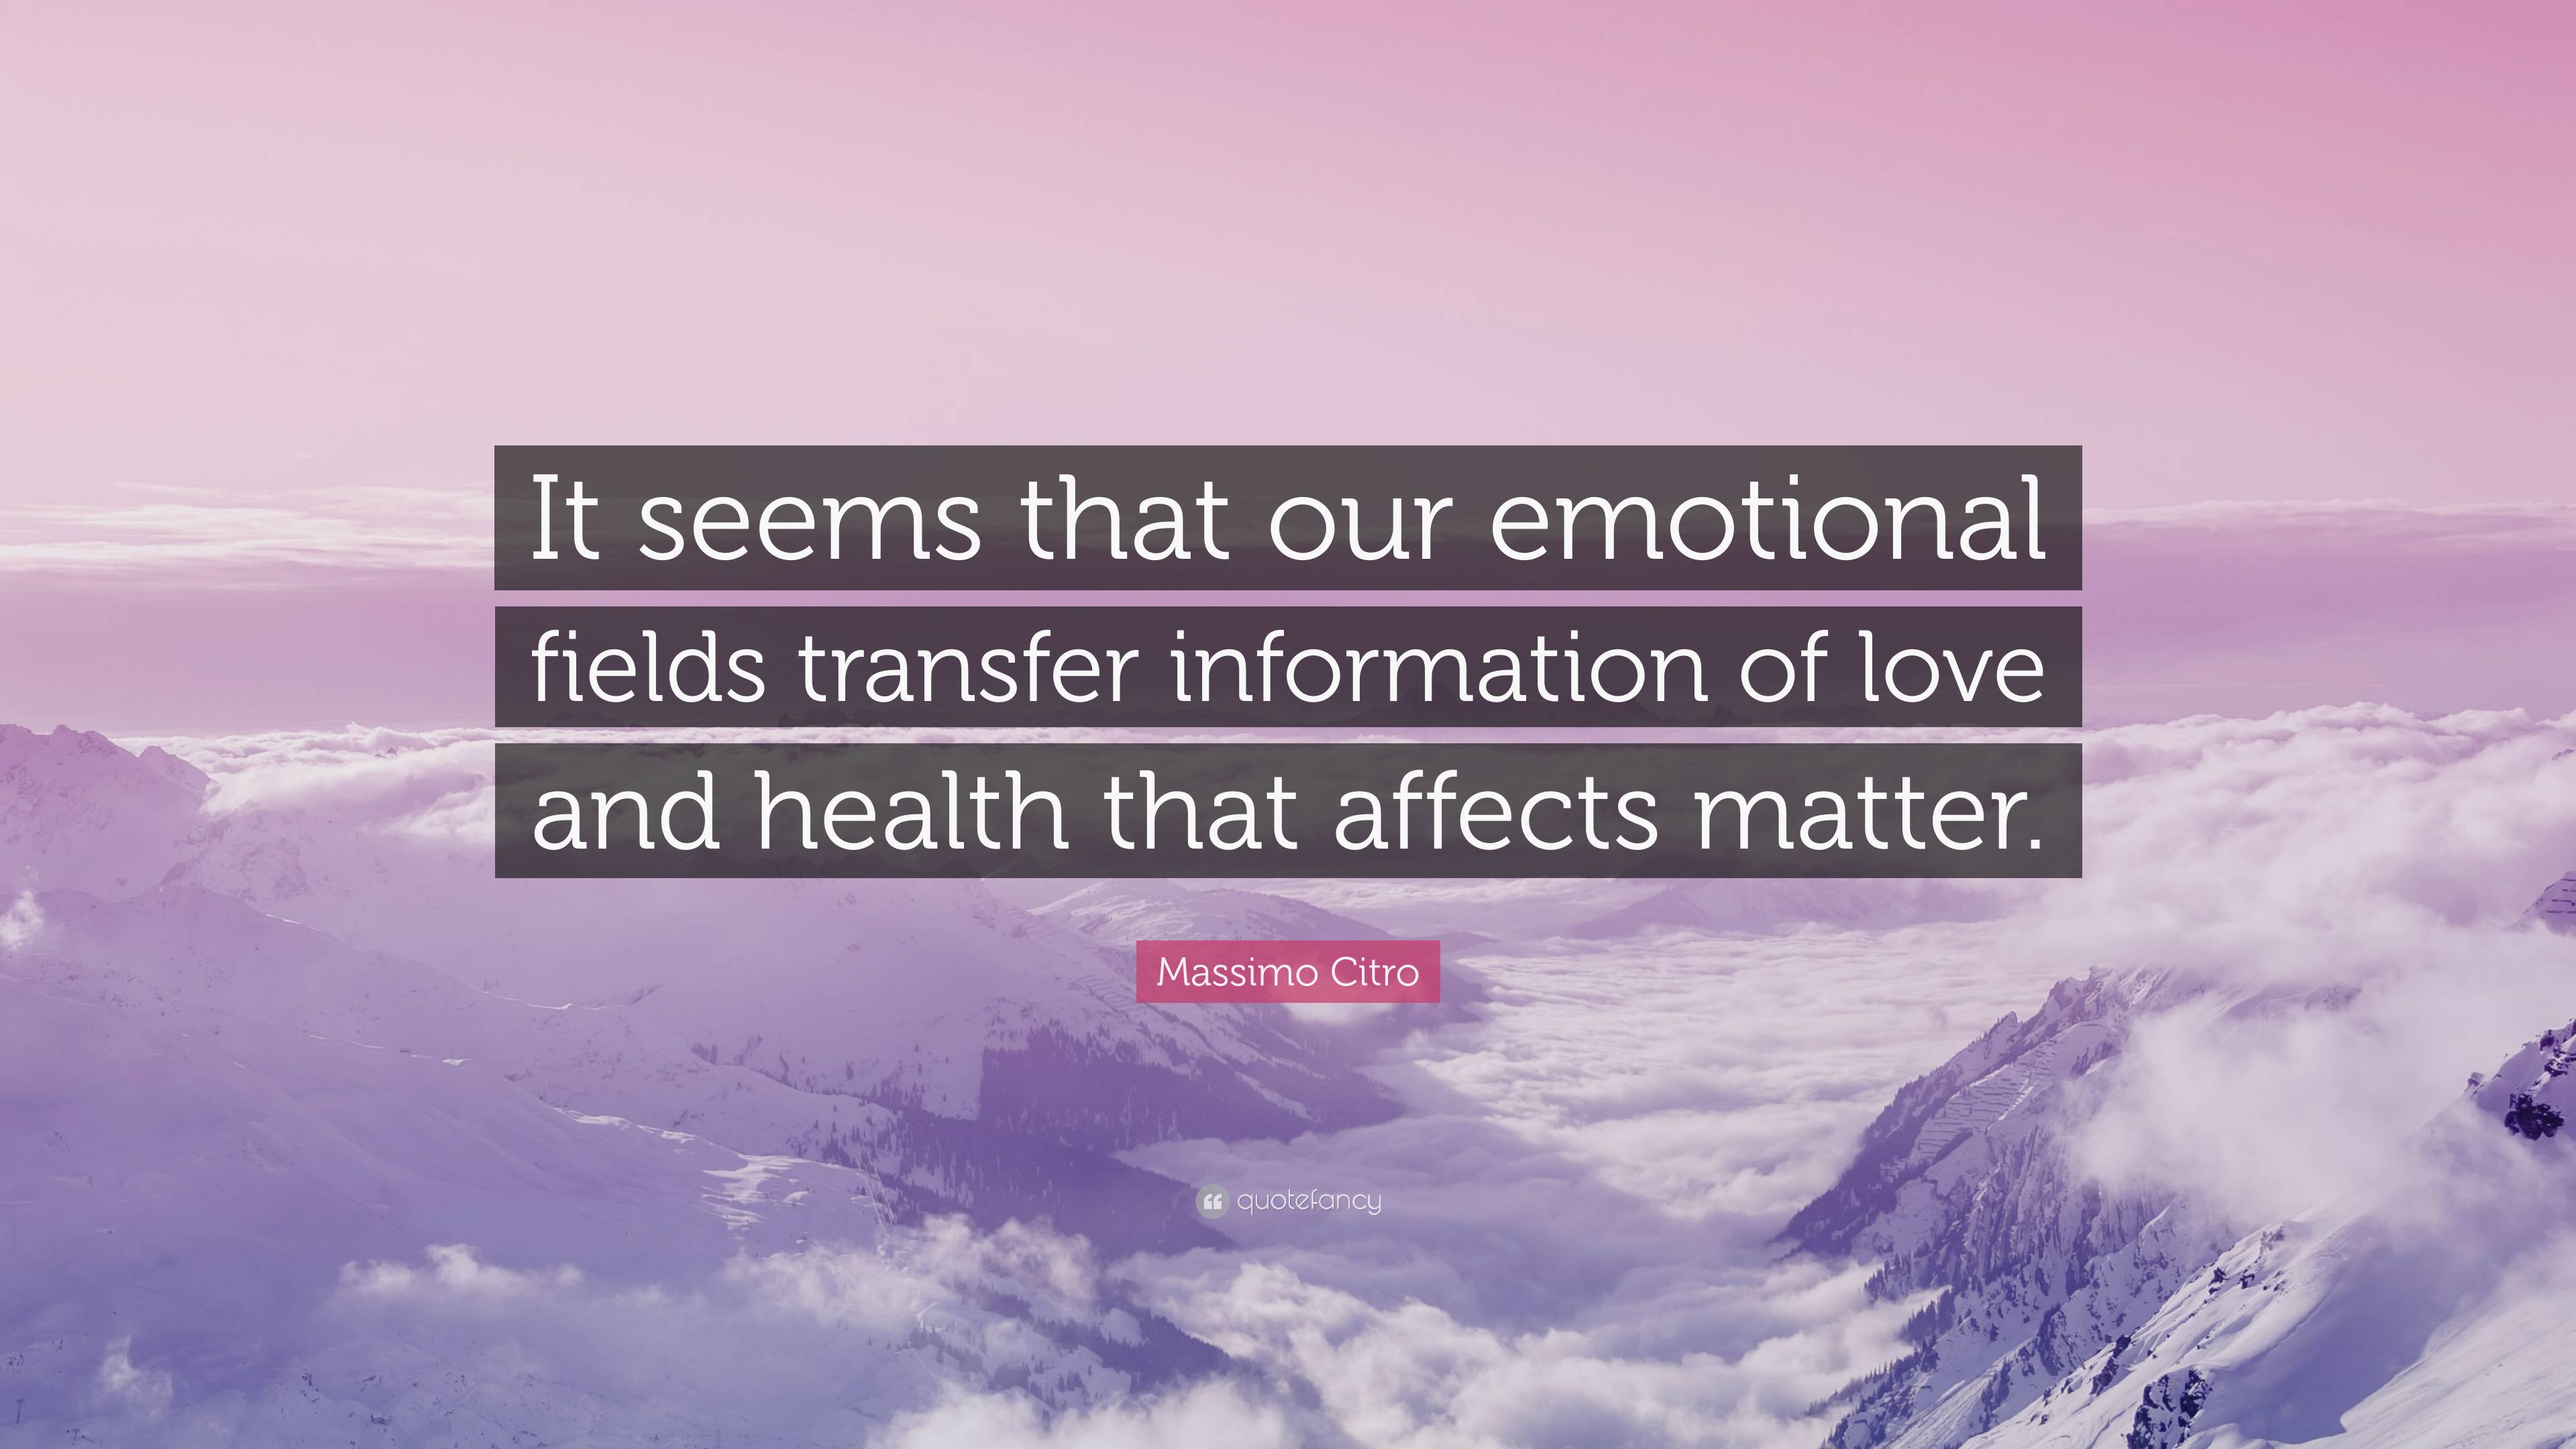 Massimo Citro Quote: “It seems that our emotional fields transfer ...